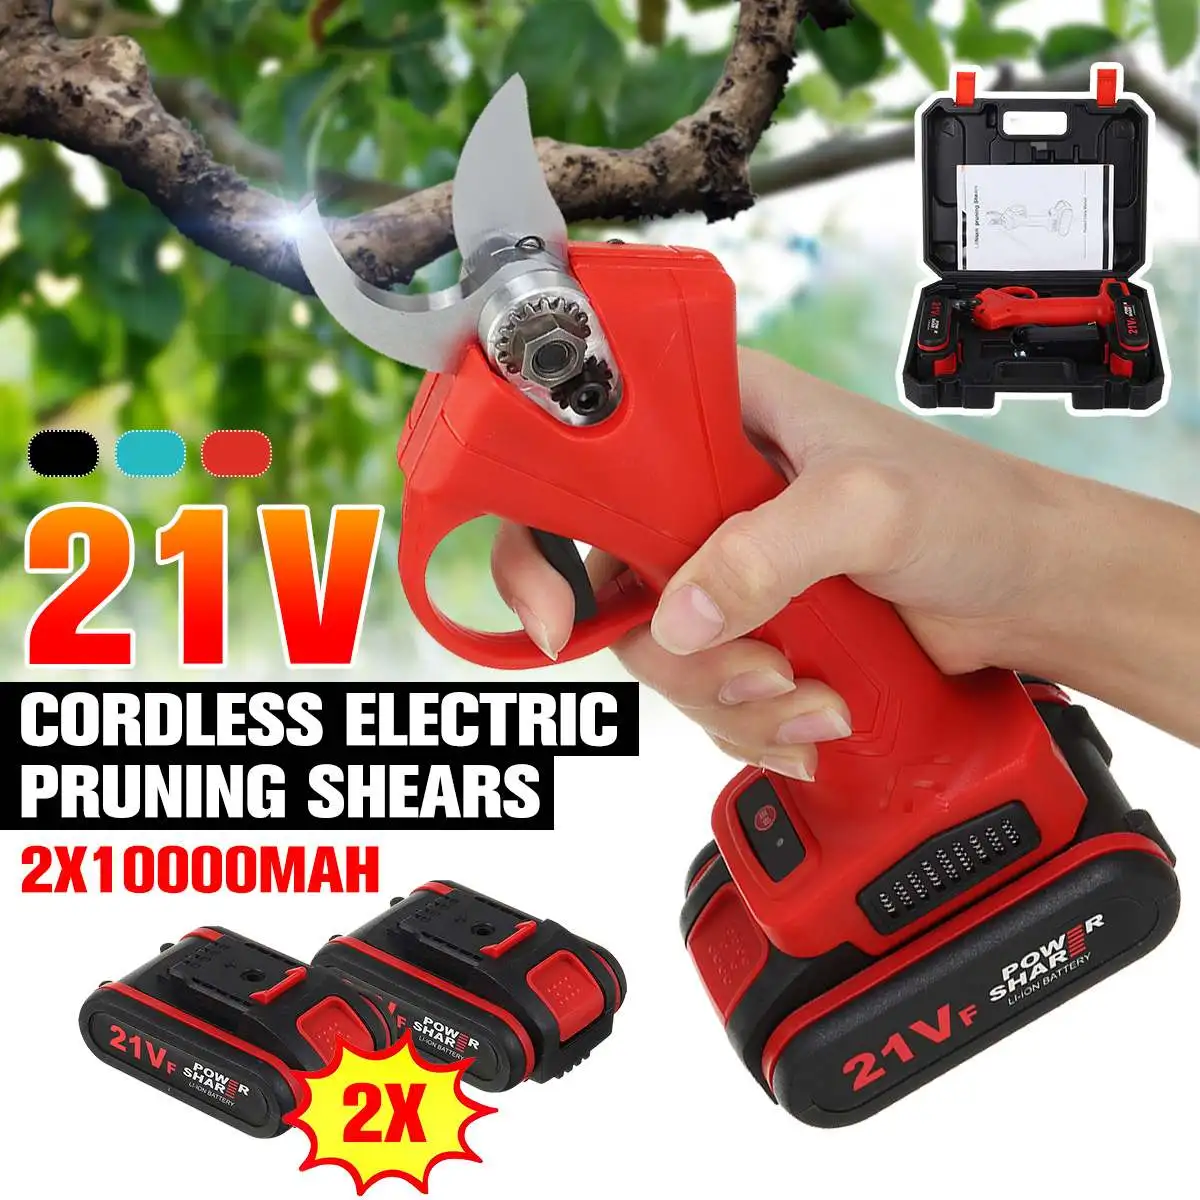 

21V Cordless Electric Pruning Shears Secateur Pruner Tree Bonsai Cutter With 2PC Lithium-Ion Branches Scissor Garden Tool 2.5cm